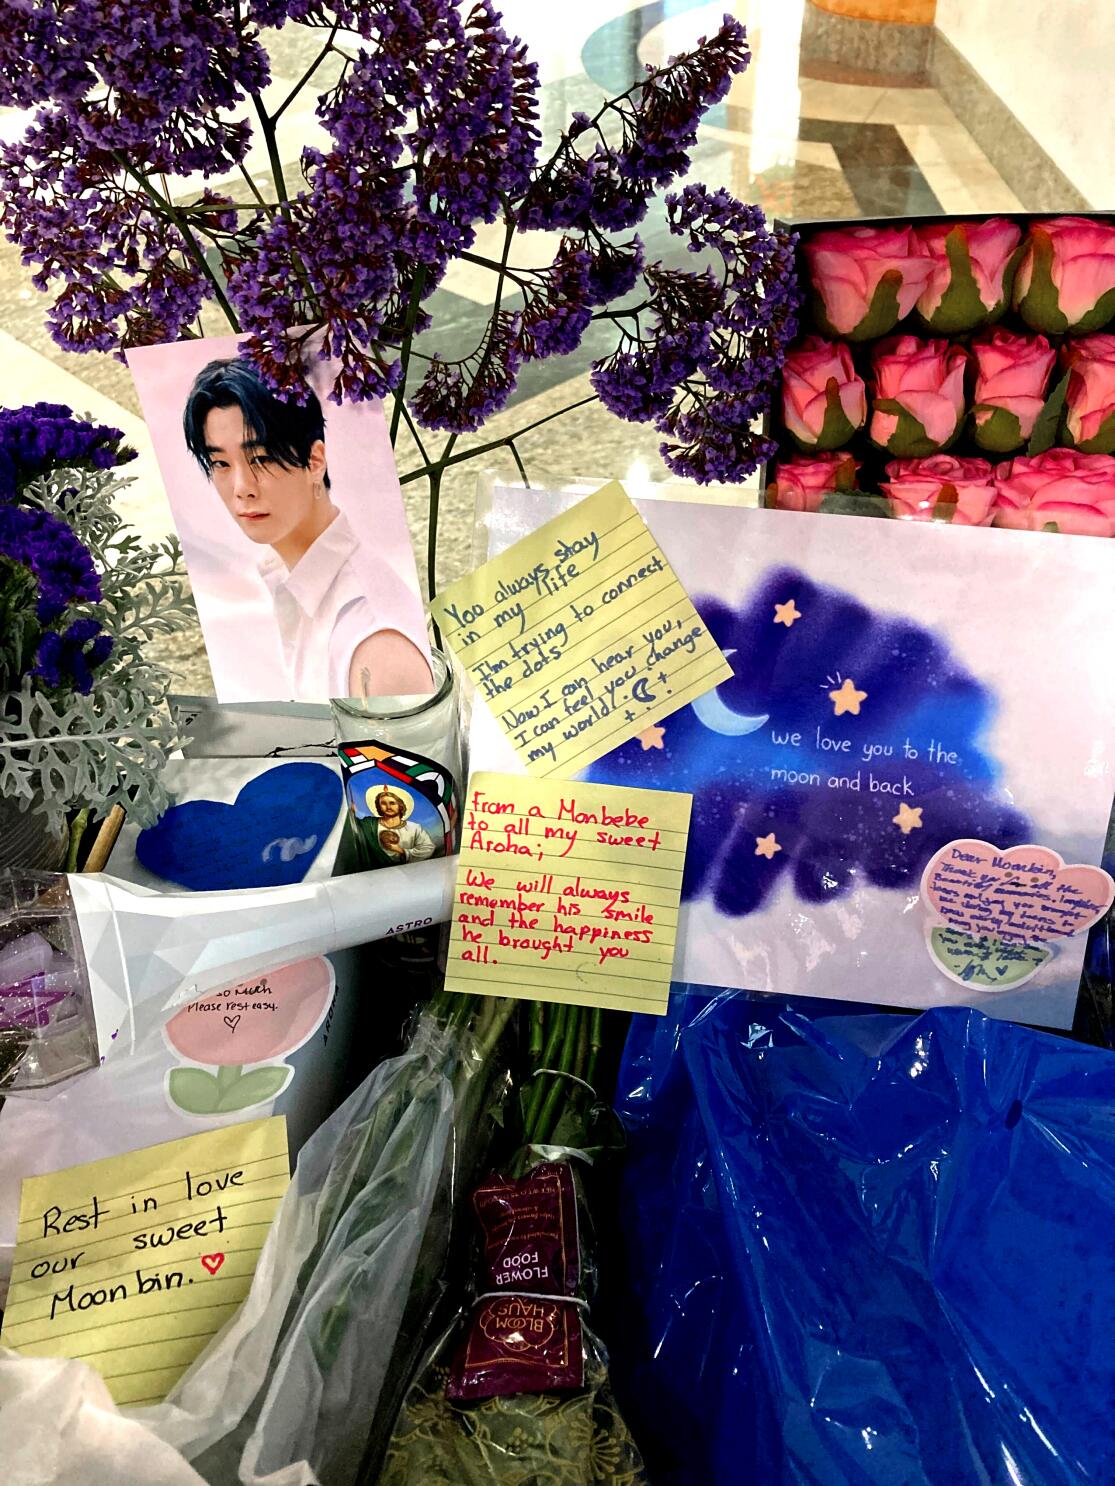 ASTRO star Moonbin, 25, found dead at home as fans pay tribute to